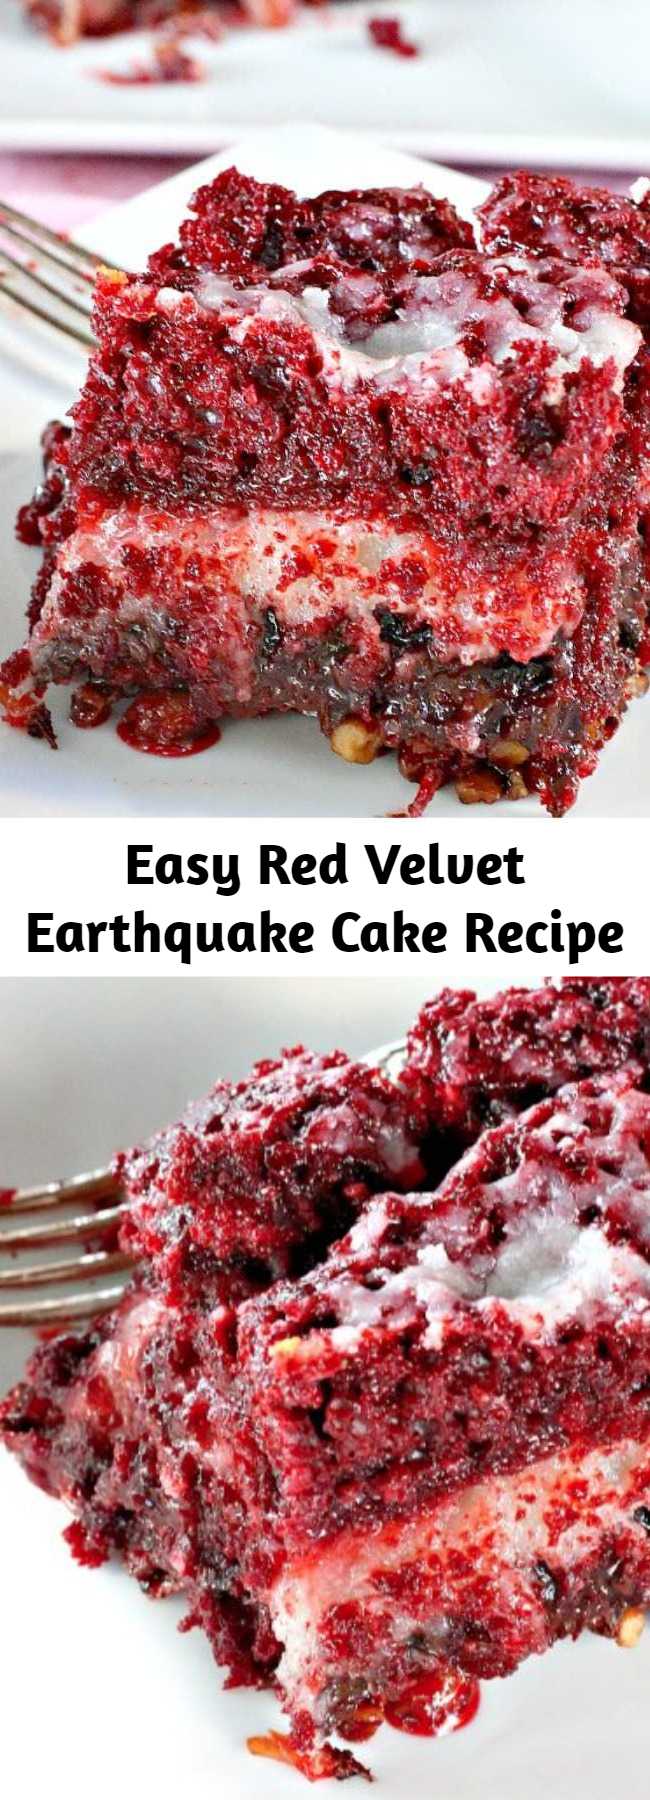 Easy Red Velvet Earthquake Cake Recipe - This delectable cake recipe calls for a Red Velvet cake batter and a cheesecake layer over top of pecans, coconut and chocolate chips. While baking the cake undergoes a seismic shift which explains its name. Fabulous for Christmas and Valentine's Day or other holiday baking.